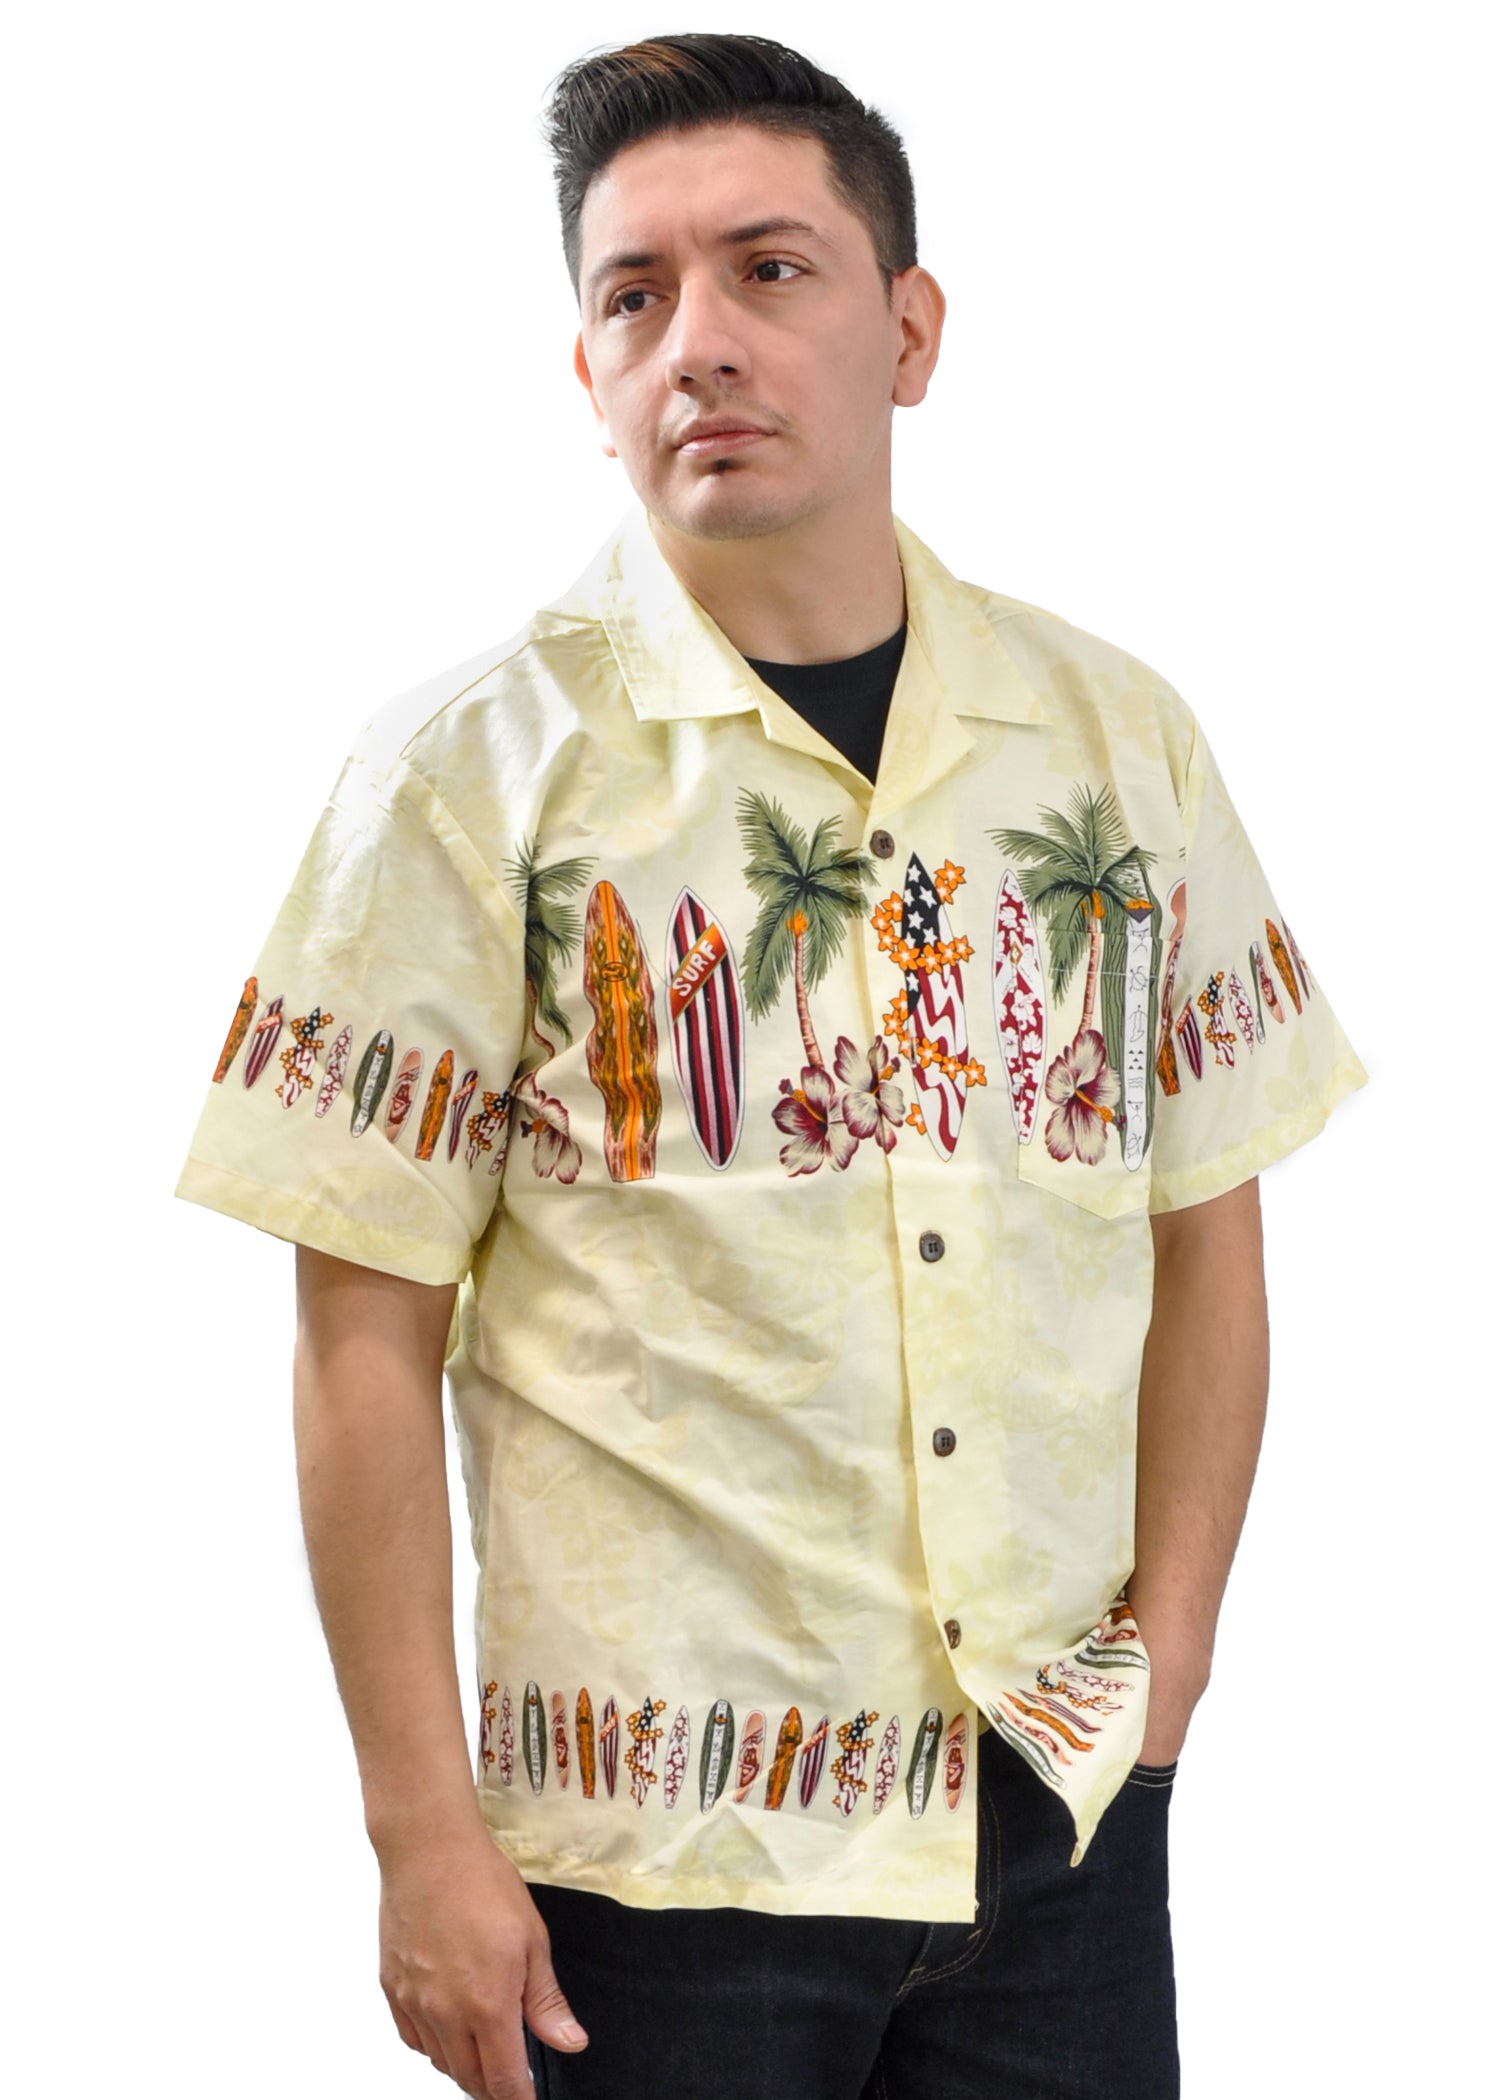 Model wearing High Surf Men's Hawaiian Shirt depicting Palm Trees, Cars and Surfboards in Yellow. Front View.